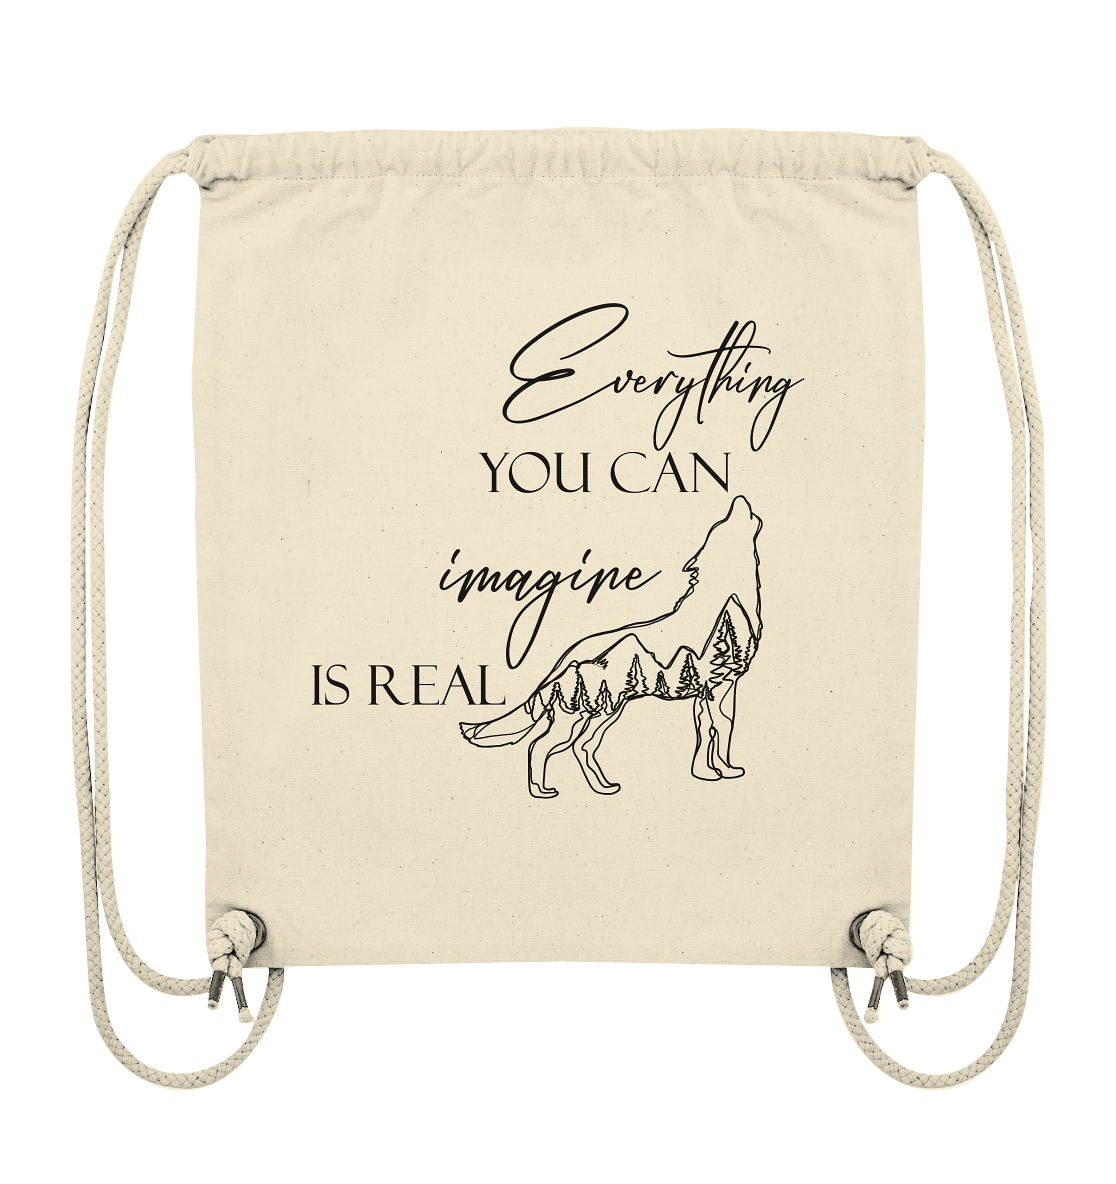 Wolf "Everything you can imagine is real" - Organic Gym-Bag